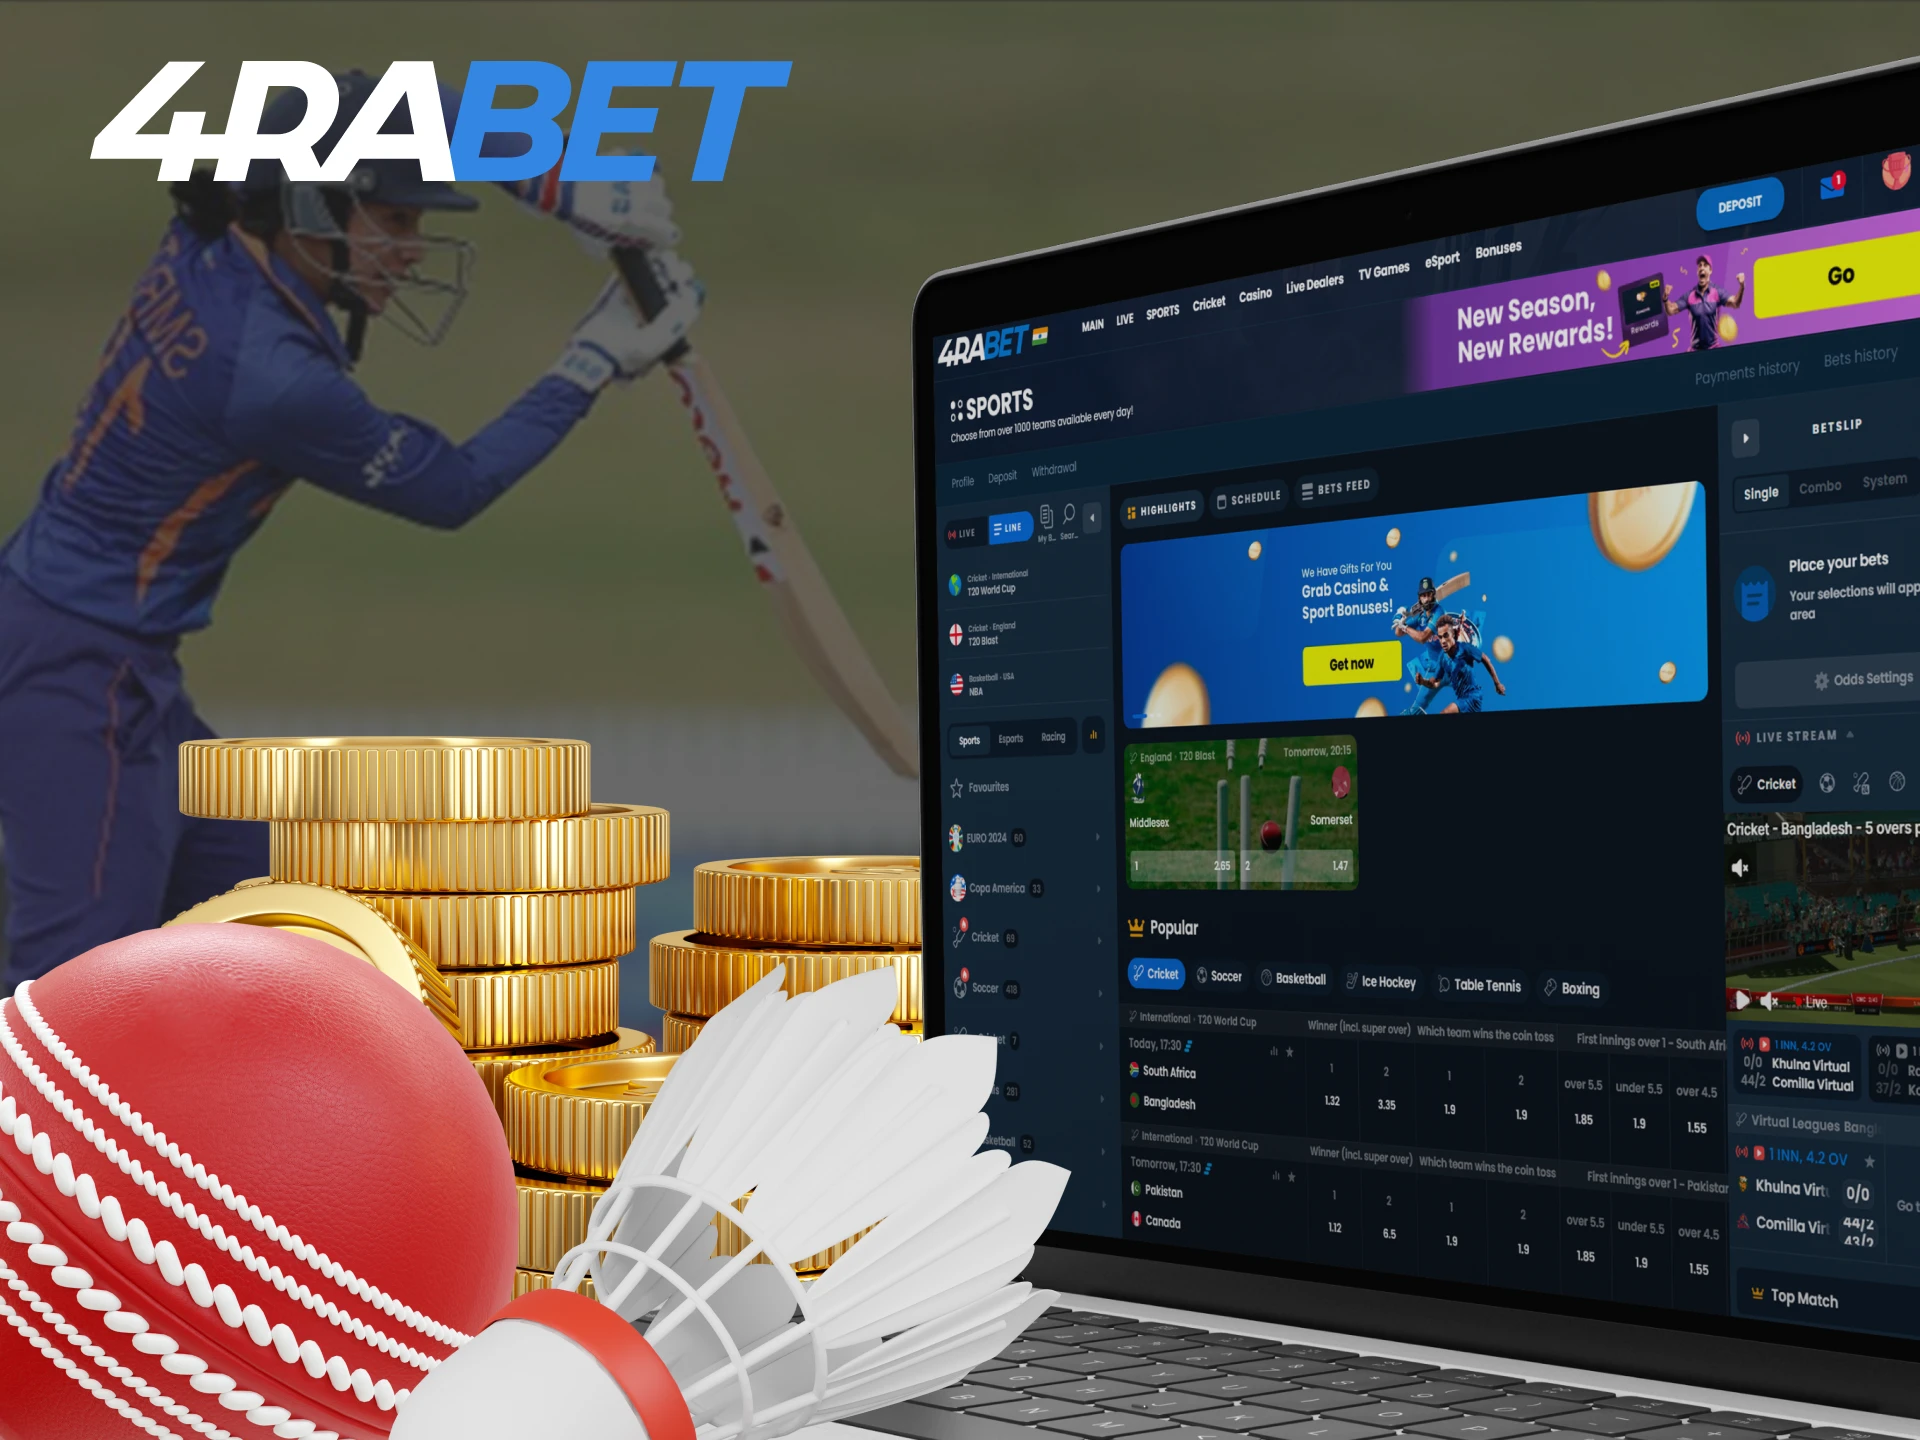 Place a sports bet at 4RaBet and win big.